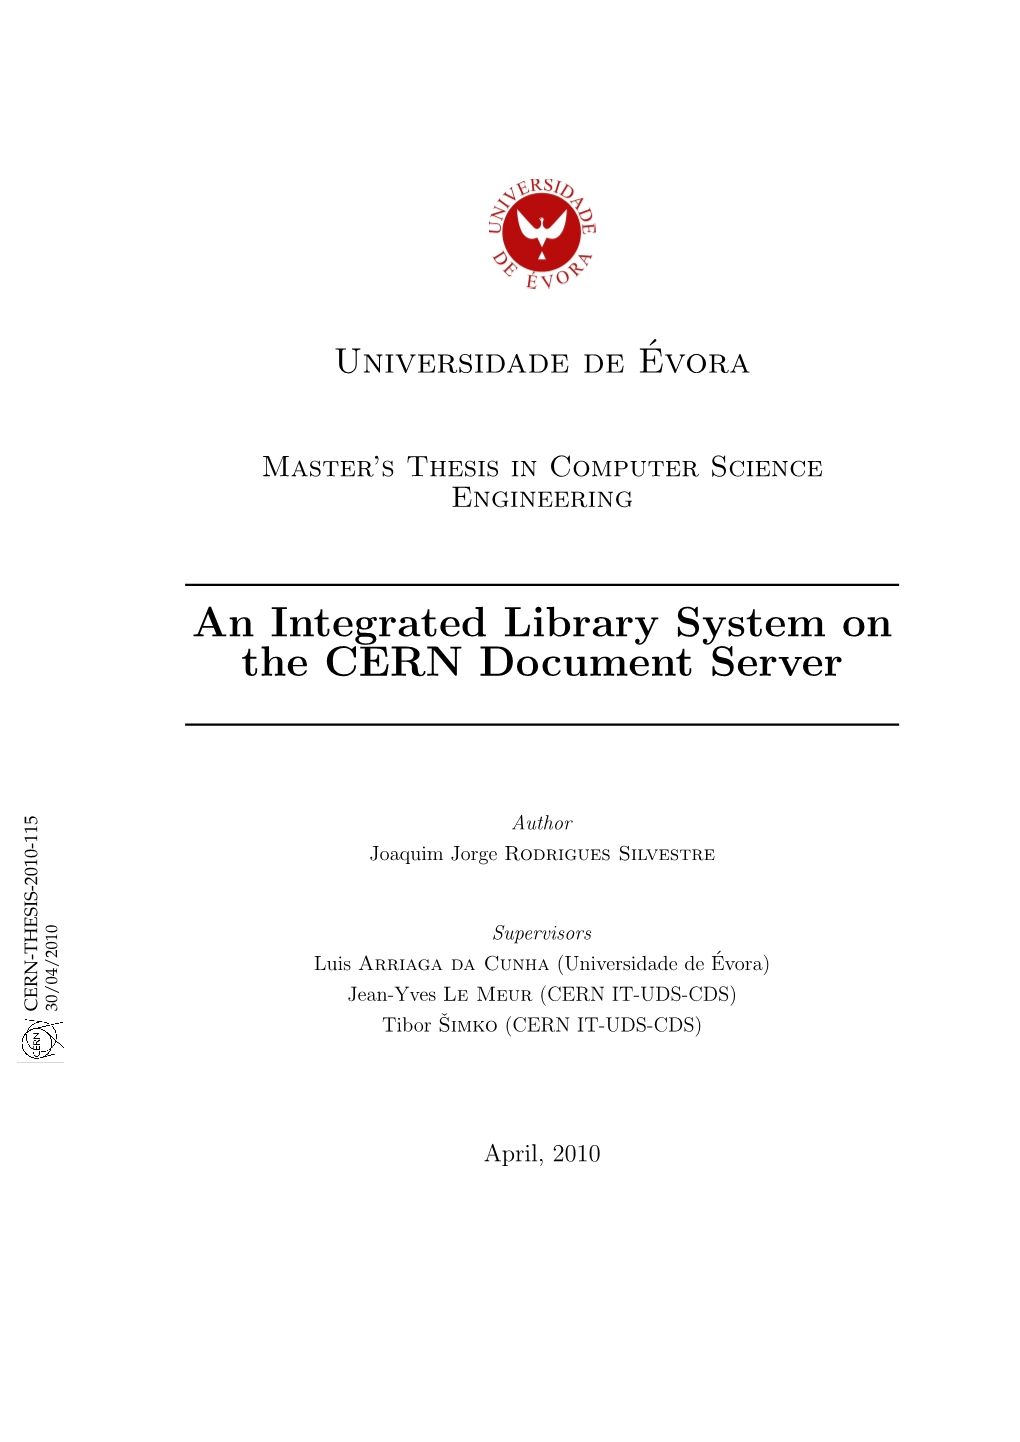 An Integrated Library System on the CERN Document Server